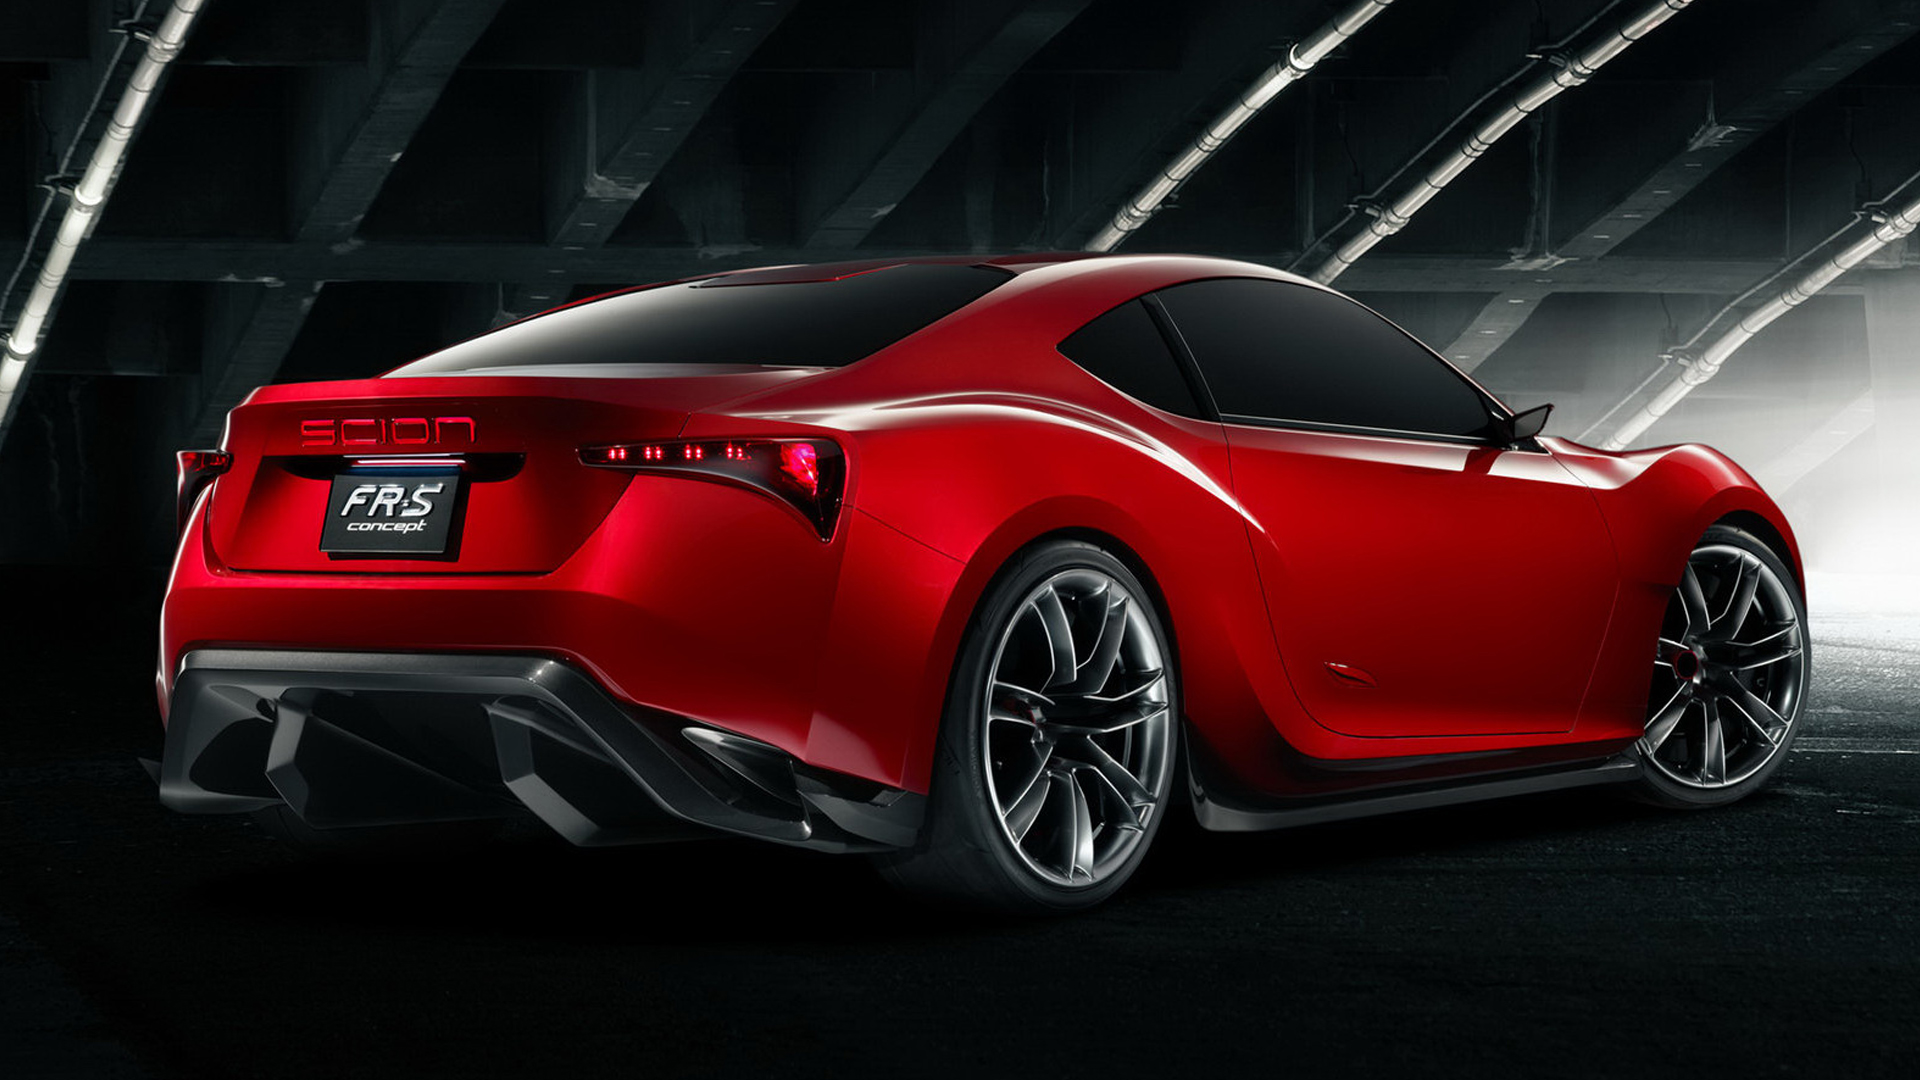 Scion FR S, Car, Vehicle, Red cars, Rear view Wallpaper